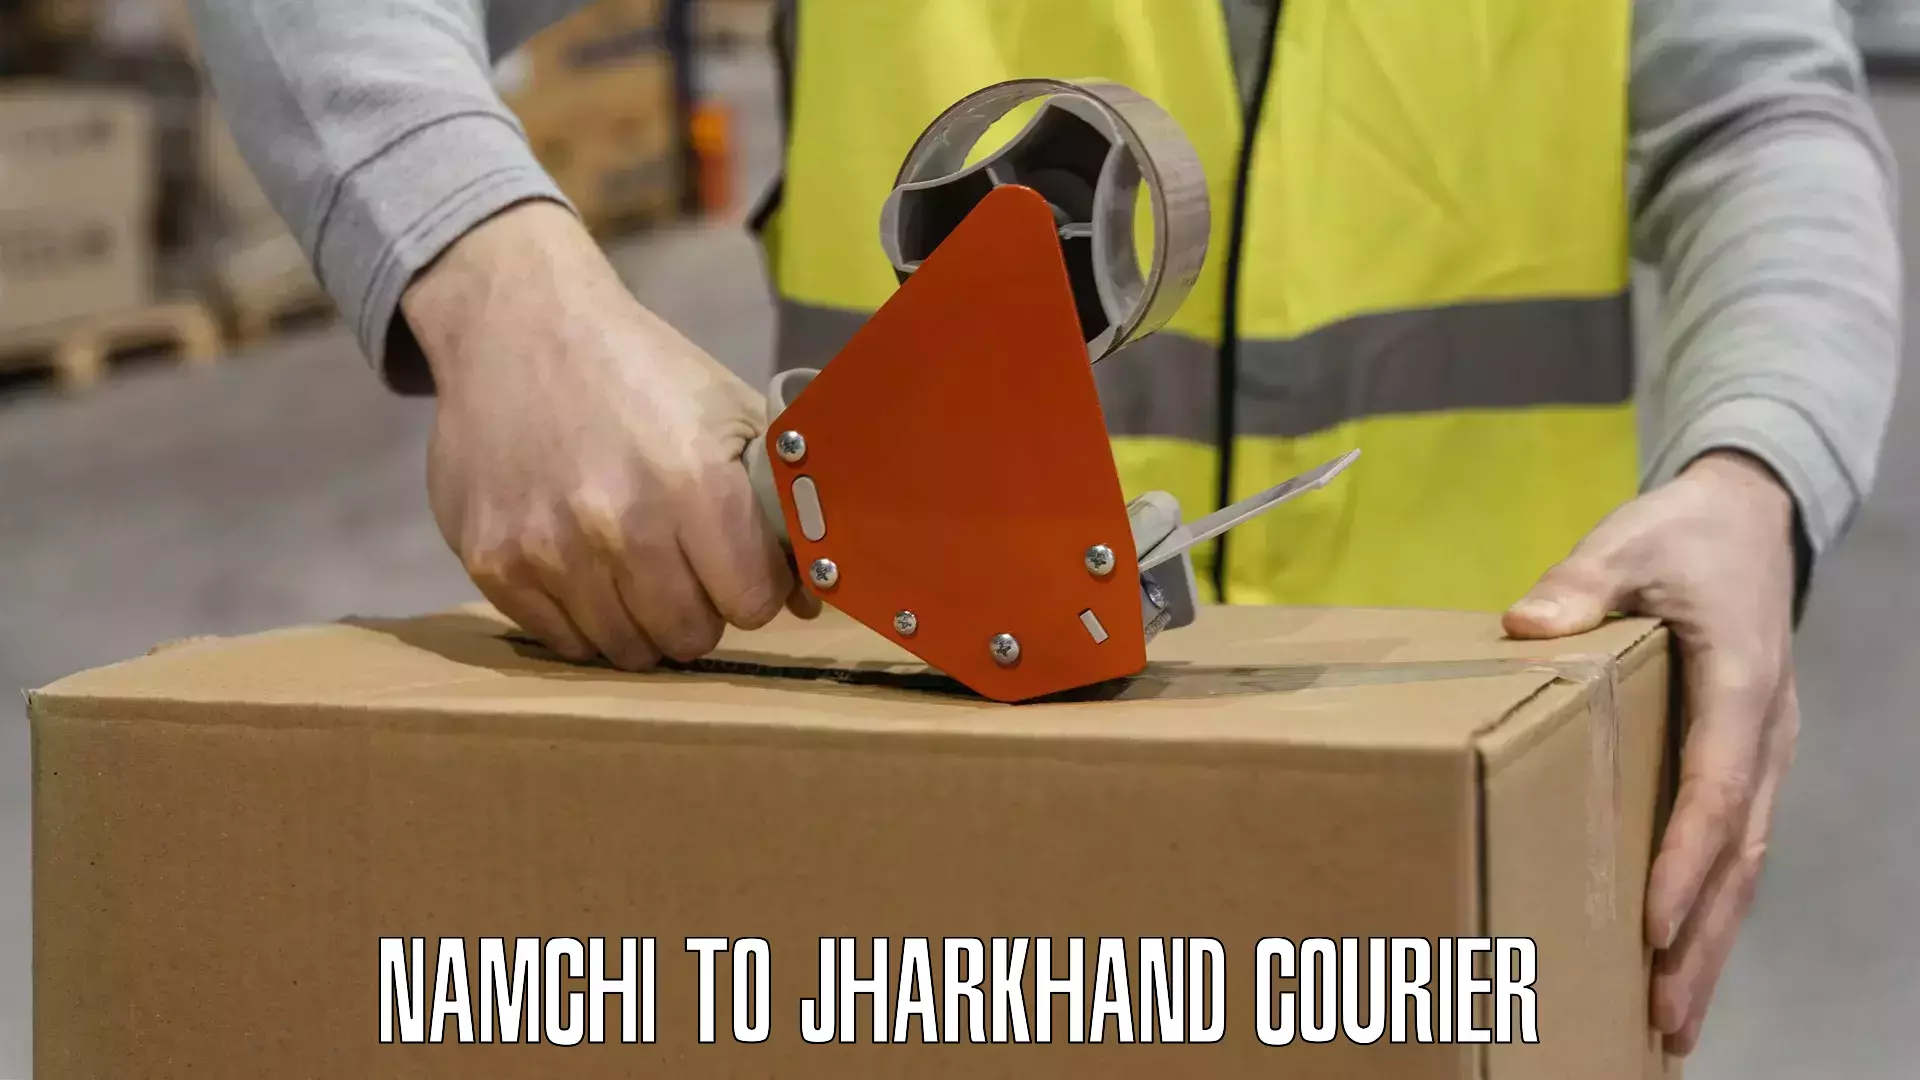 Express delivery capabilities Namchi to Jharkhand